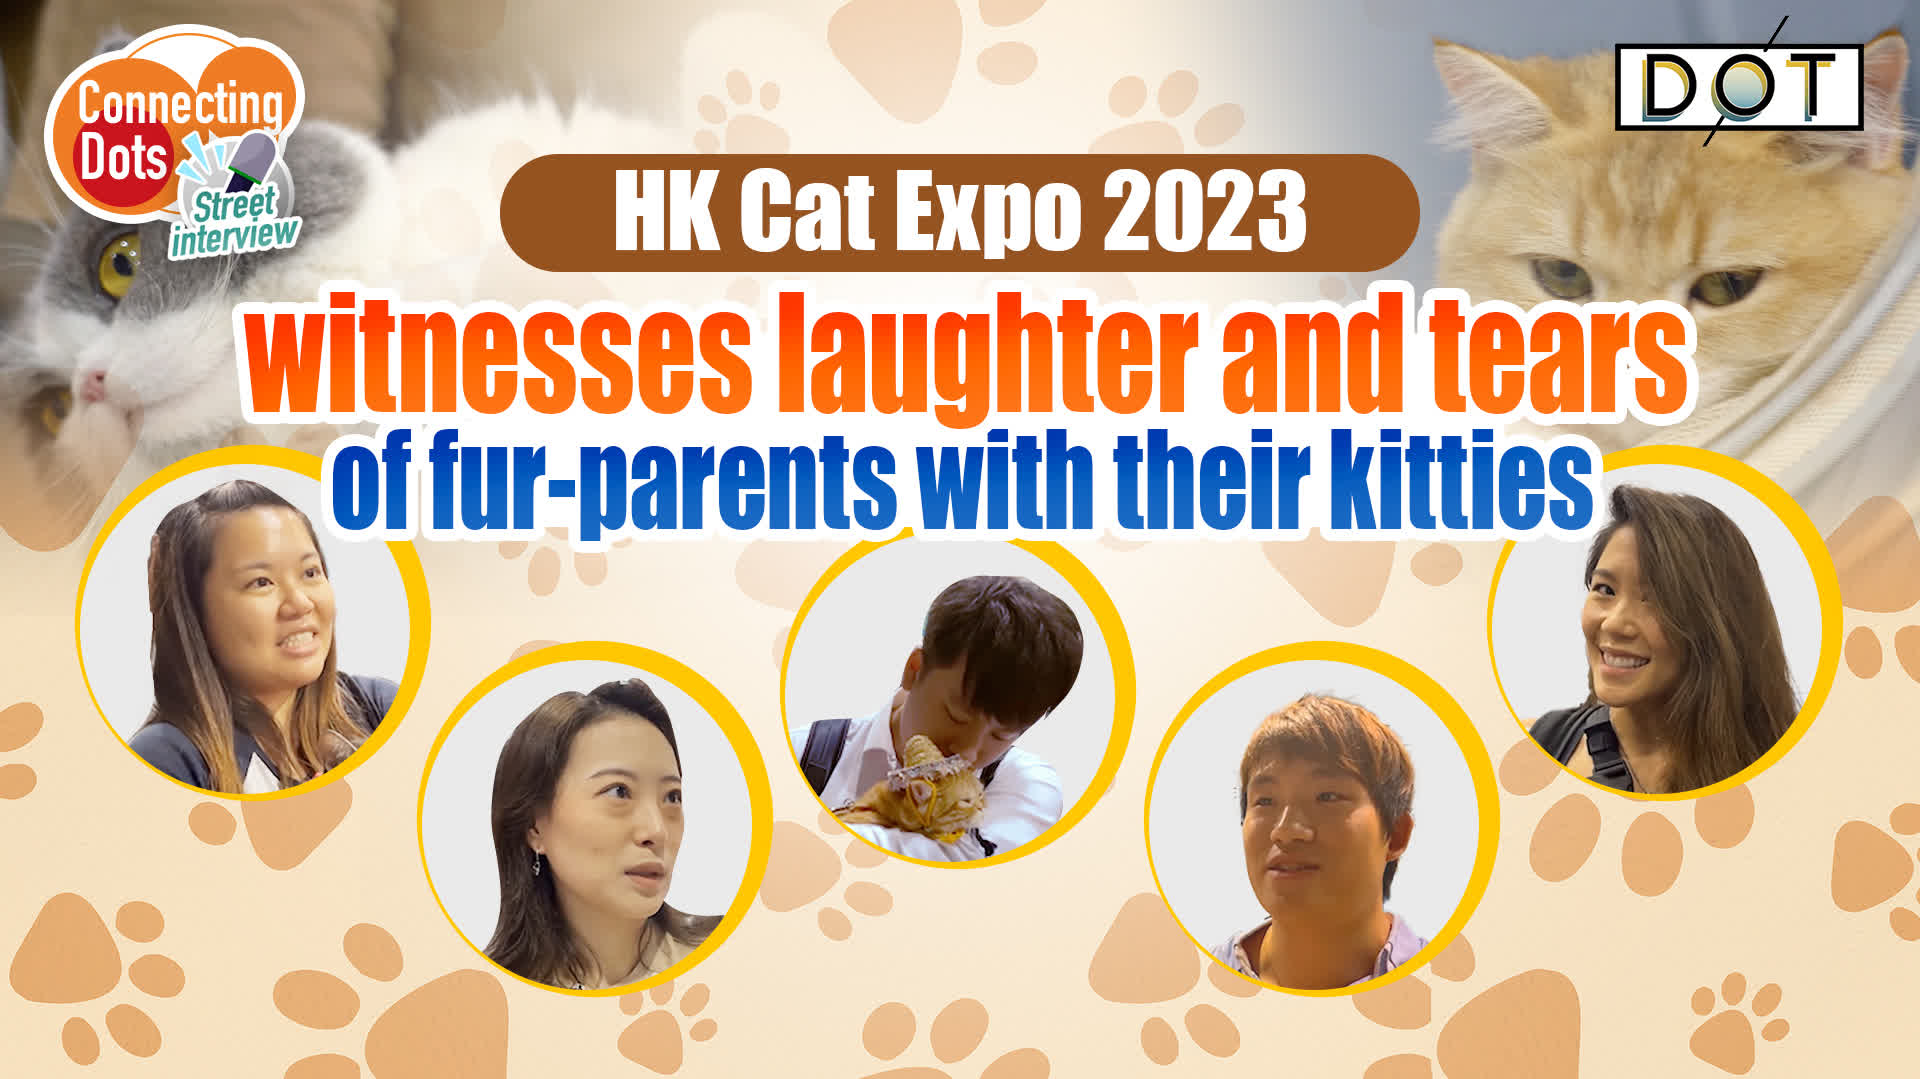 Connecting Dots | HK Cat Expo 2023 witnesses laughter and tears of fur-parents with their kitties